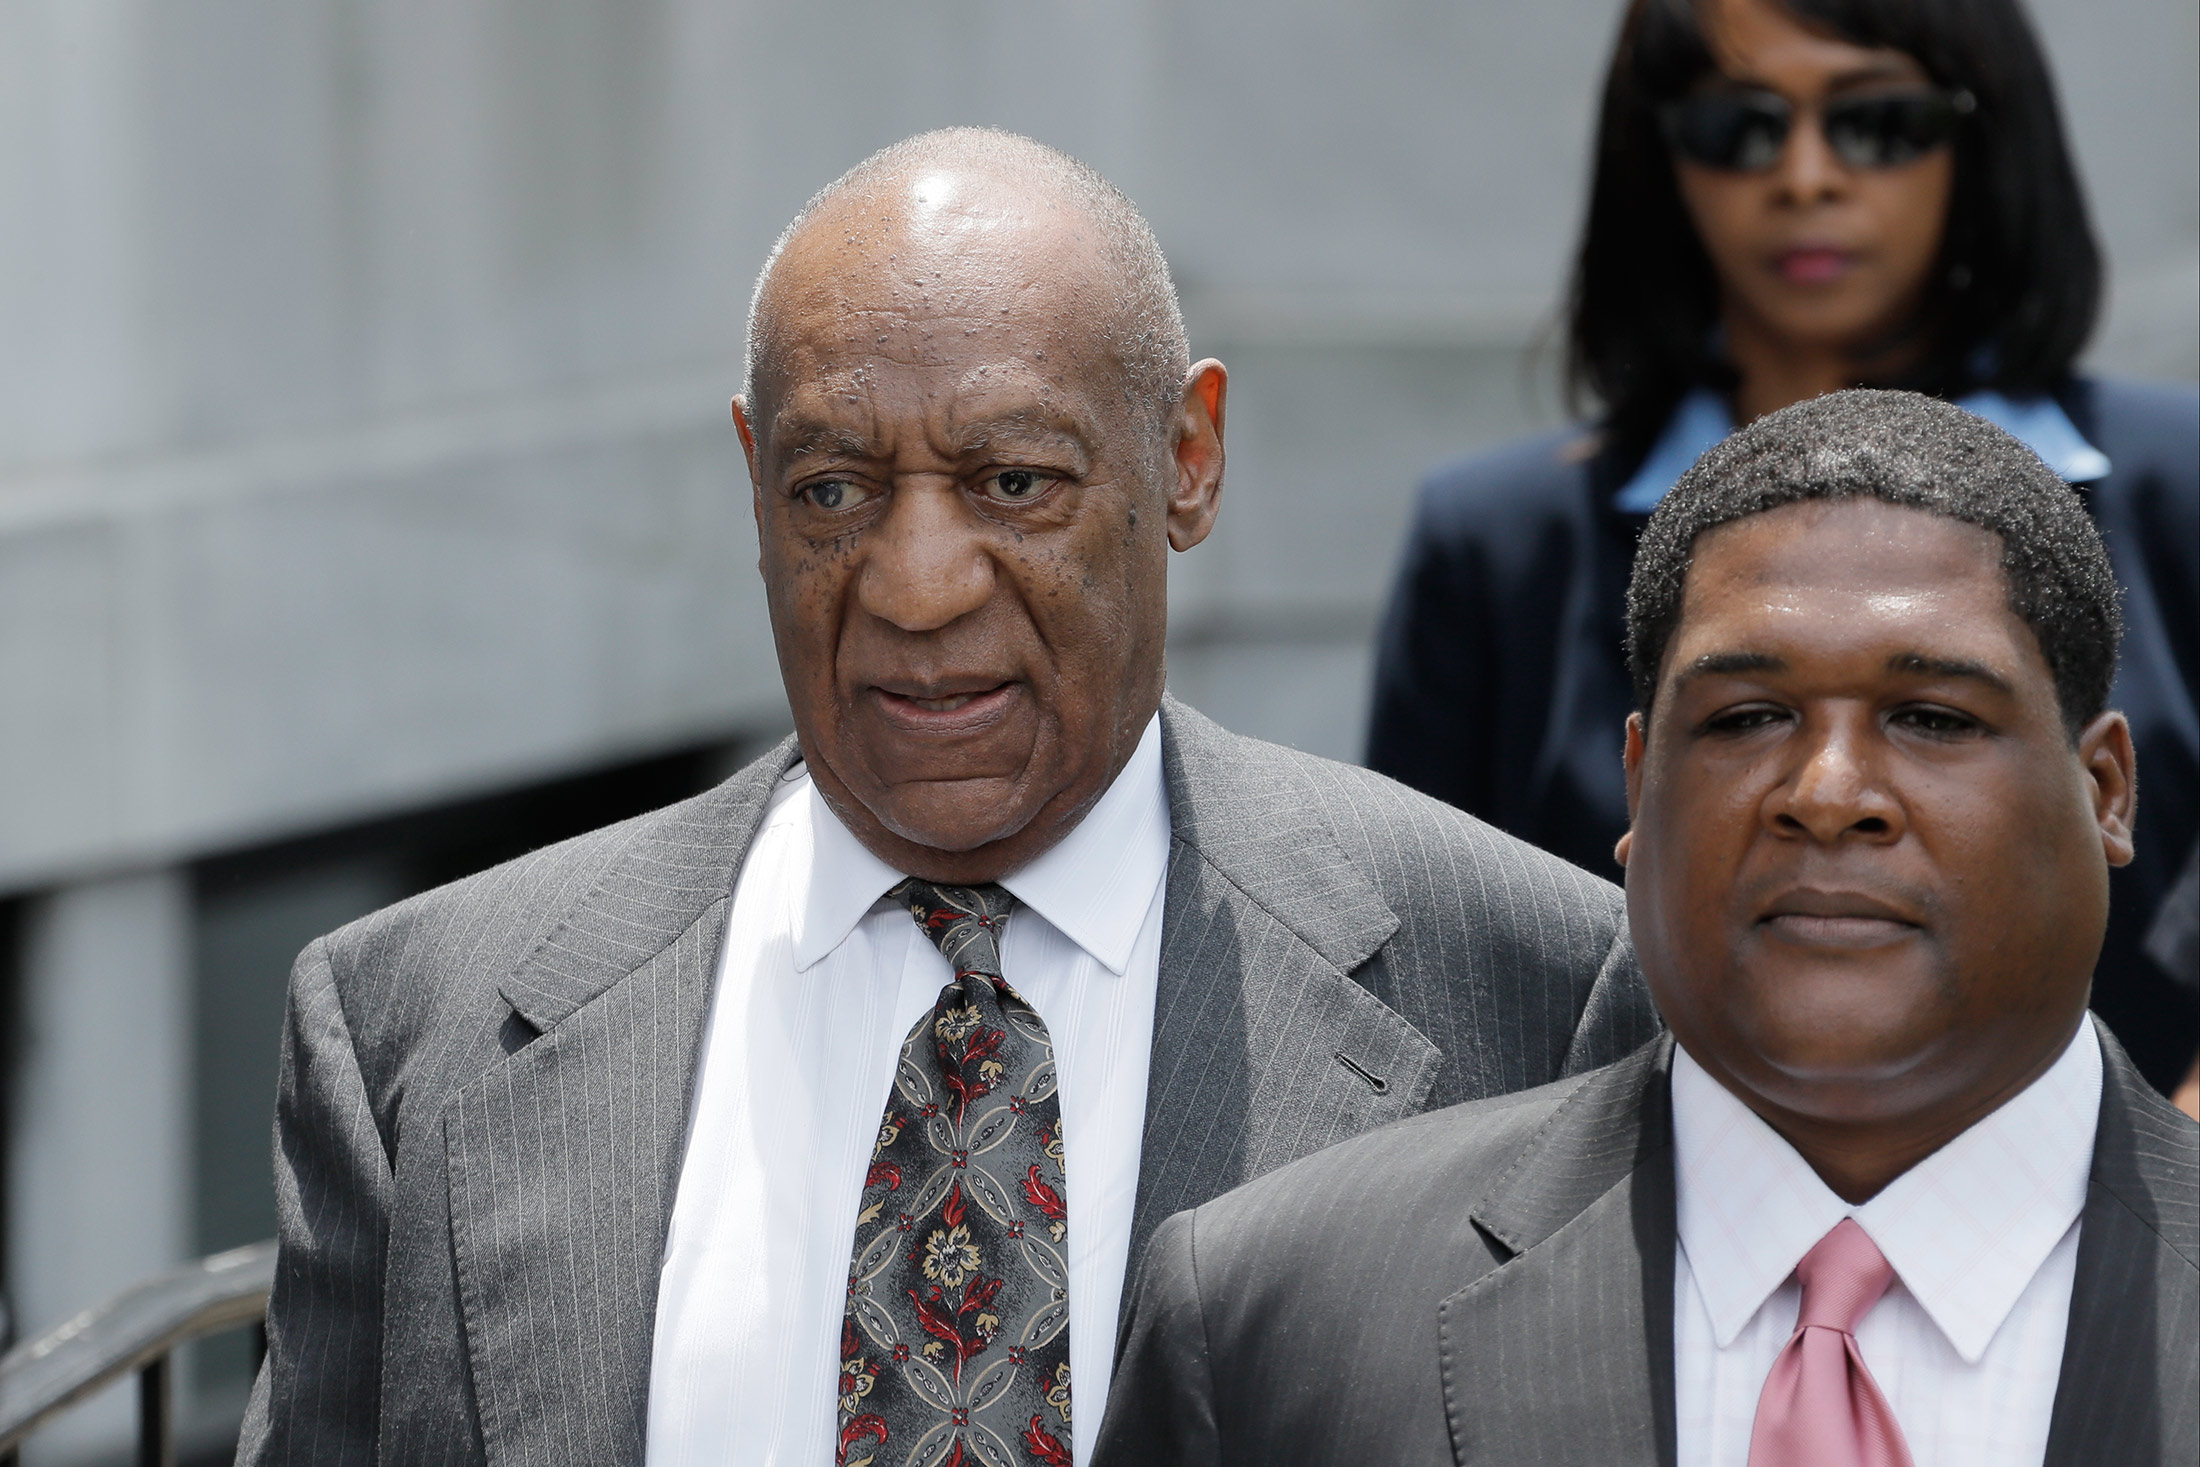 Bill Cosby leaves the Montgomery County Courthouse after a preliminary hearing on May 24, 2016 in Norristown, Pa.
